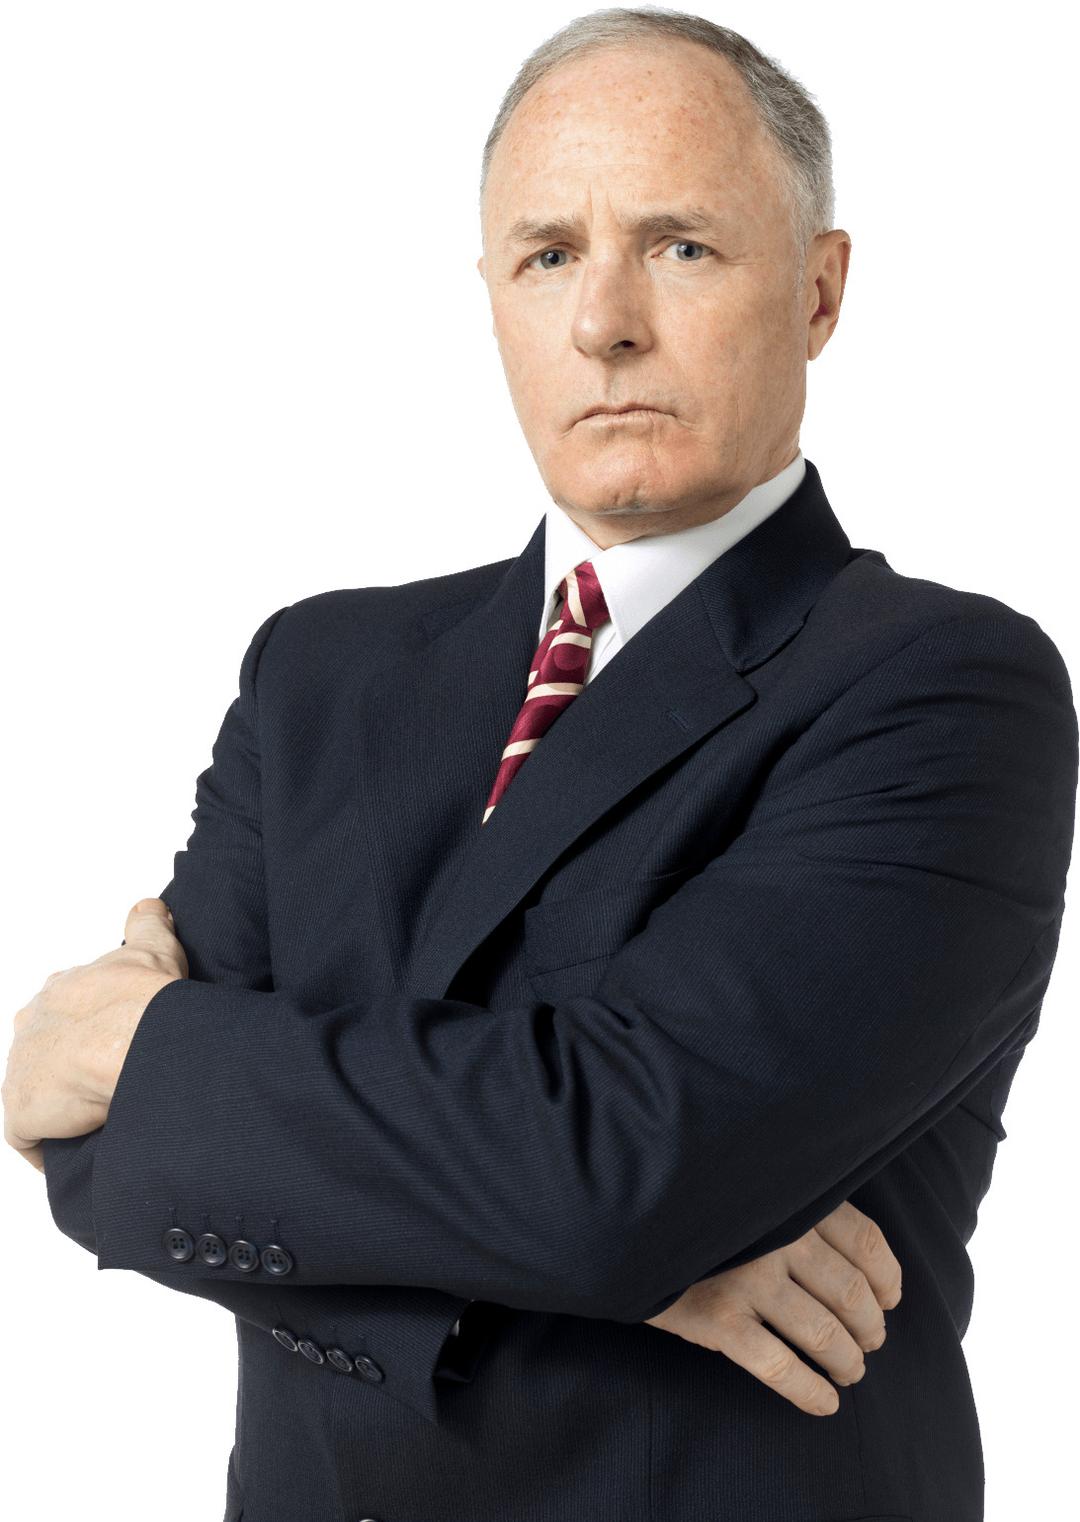 Angry Businessman png transparent